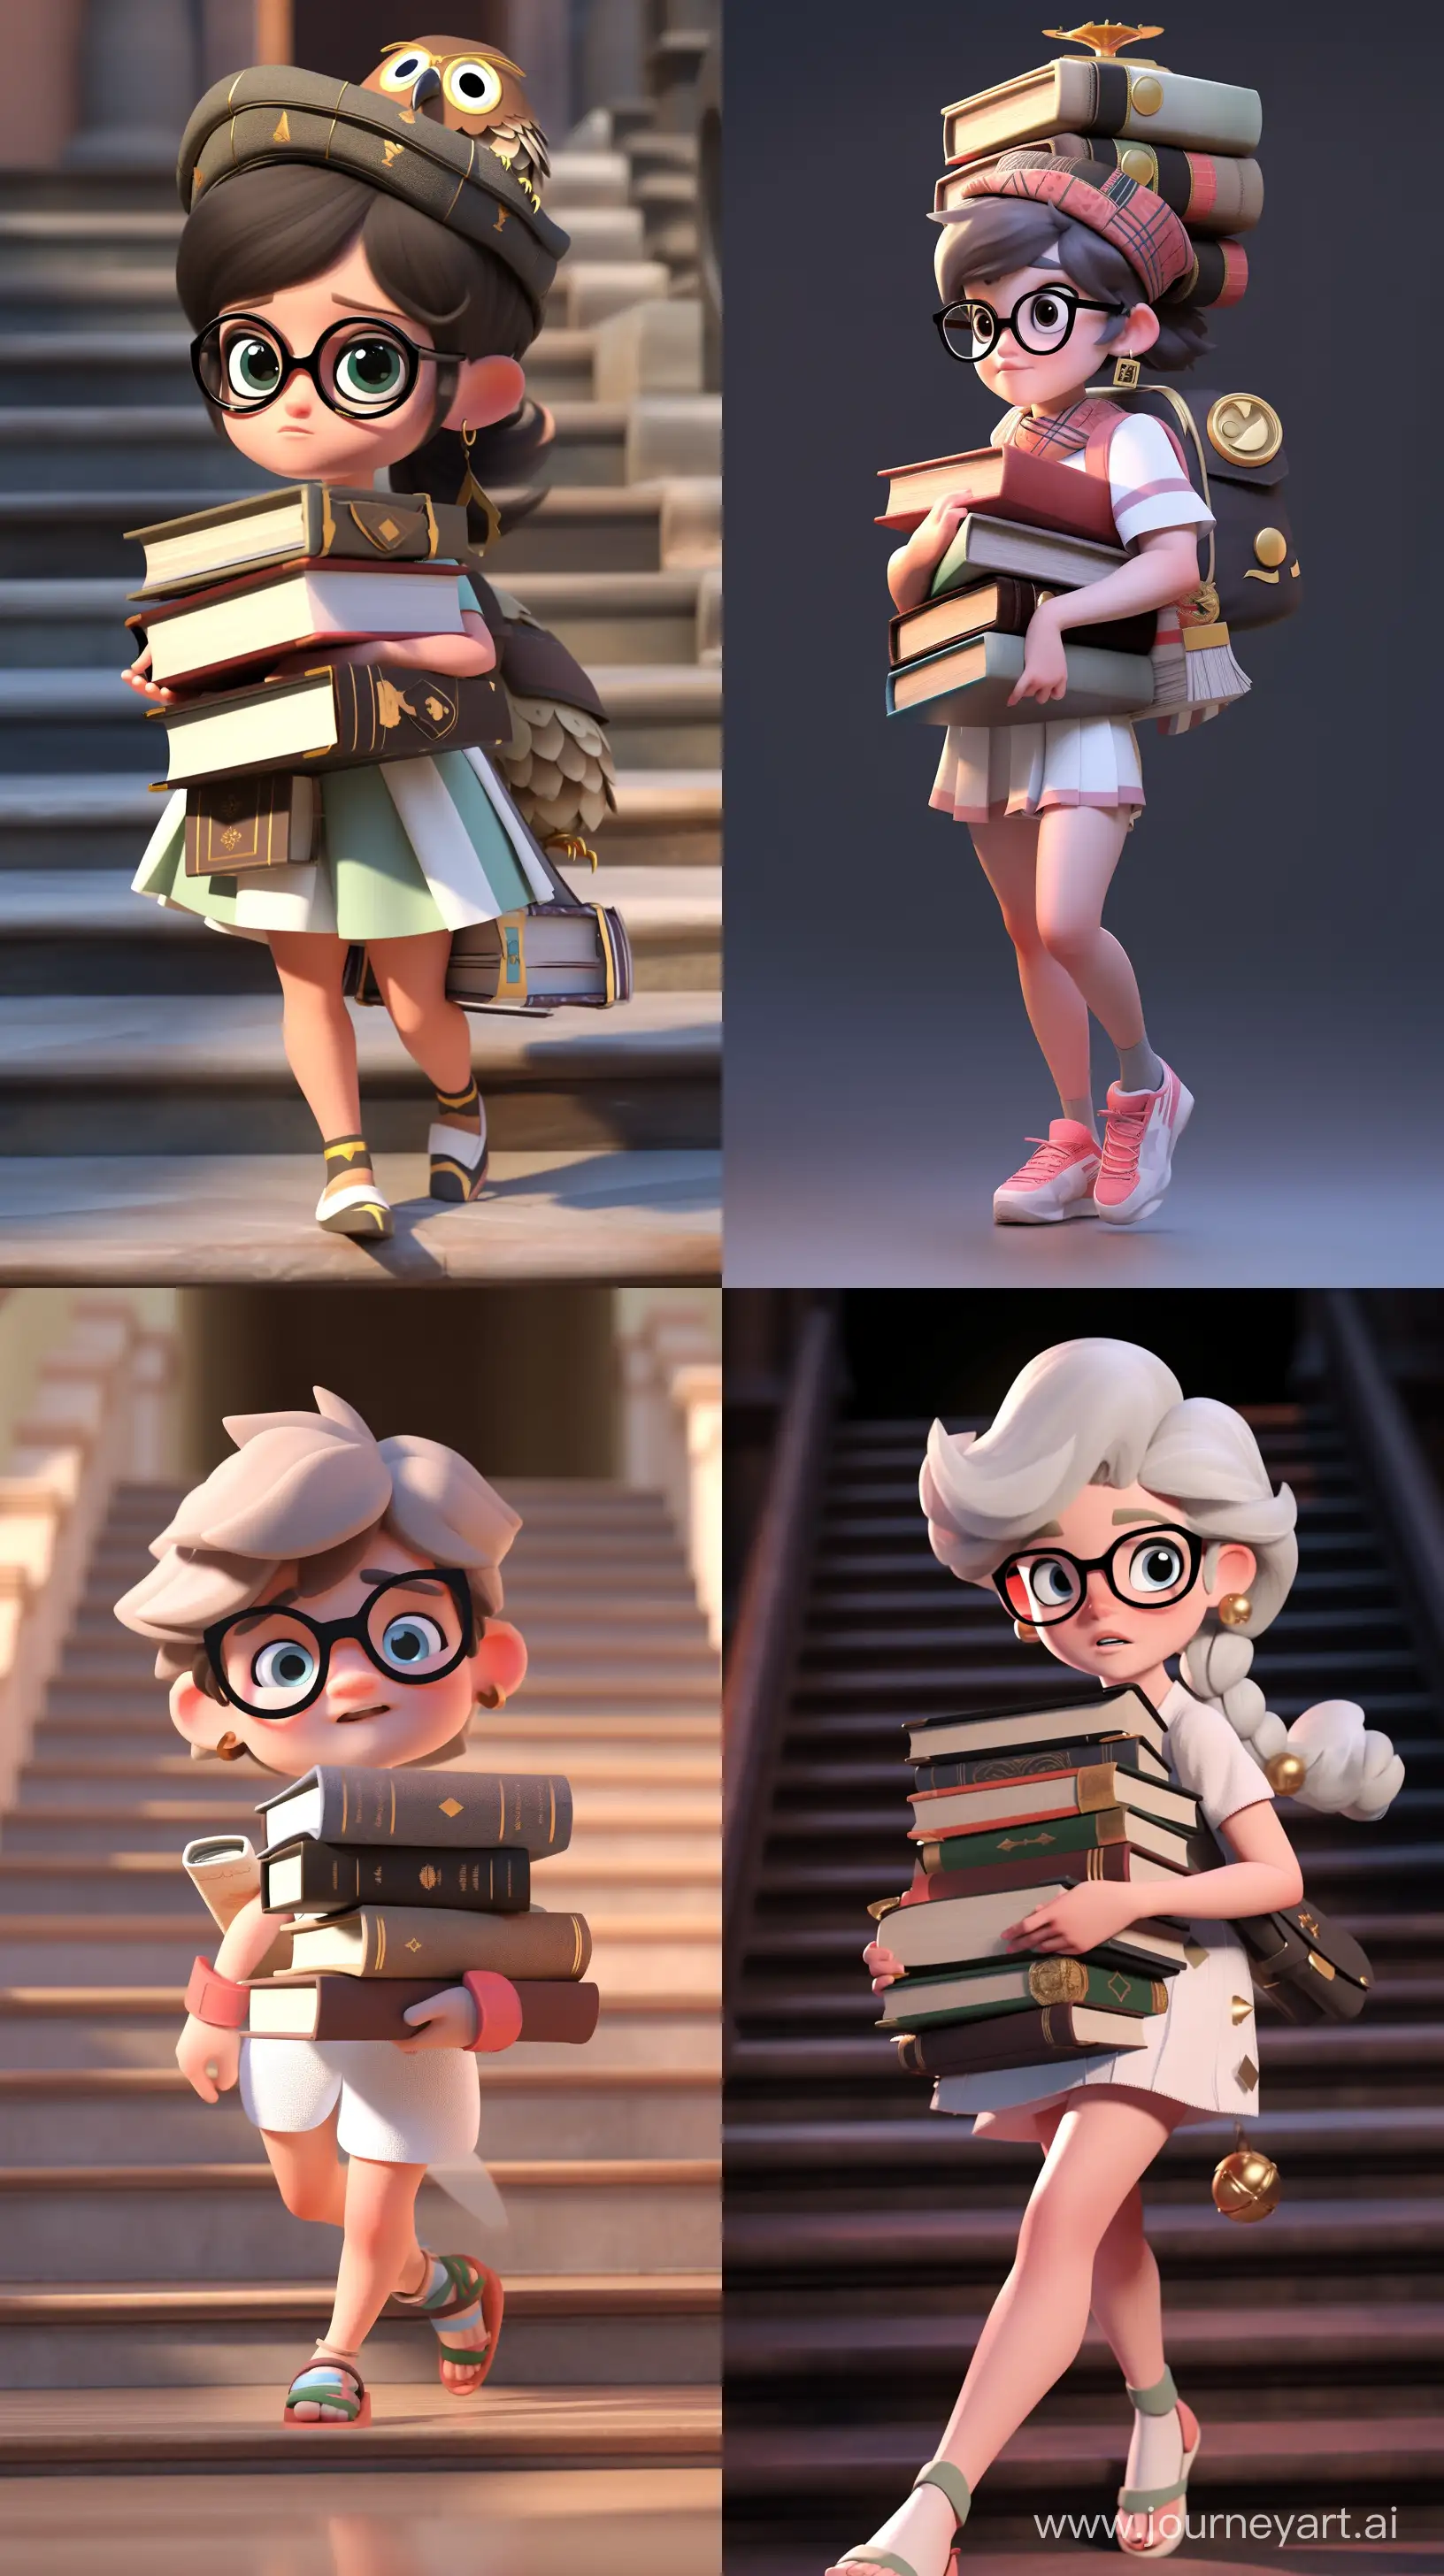 Athena-Scholar-Student-in-PixarStyle-3D-Animation-with-Glasses-and-Books